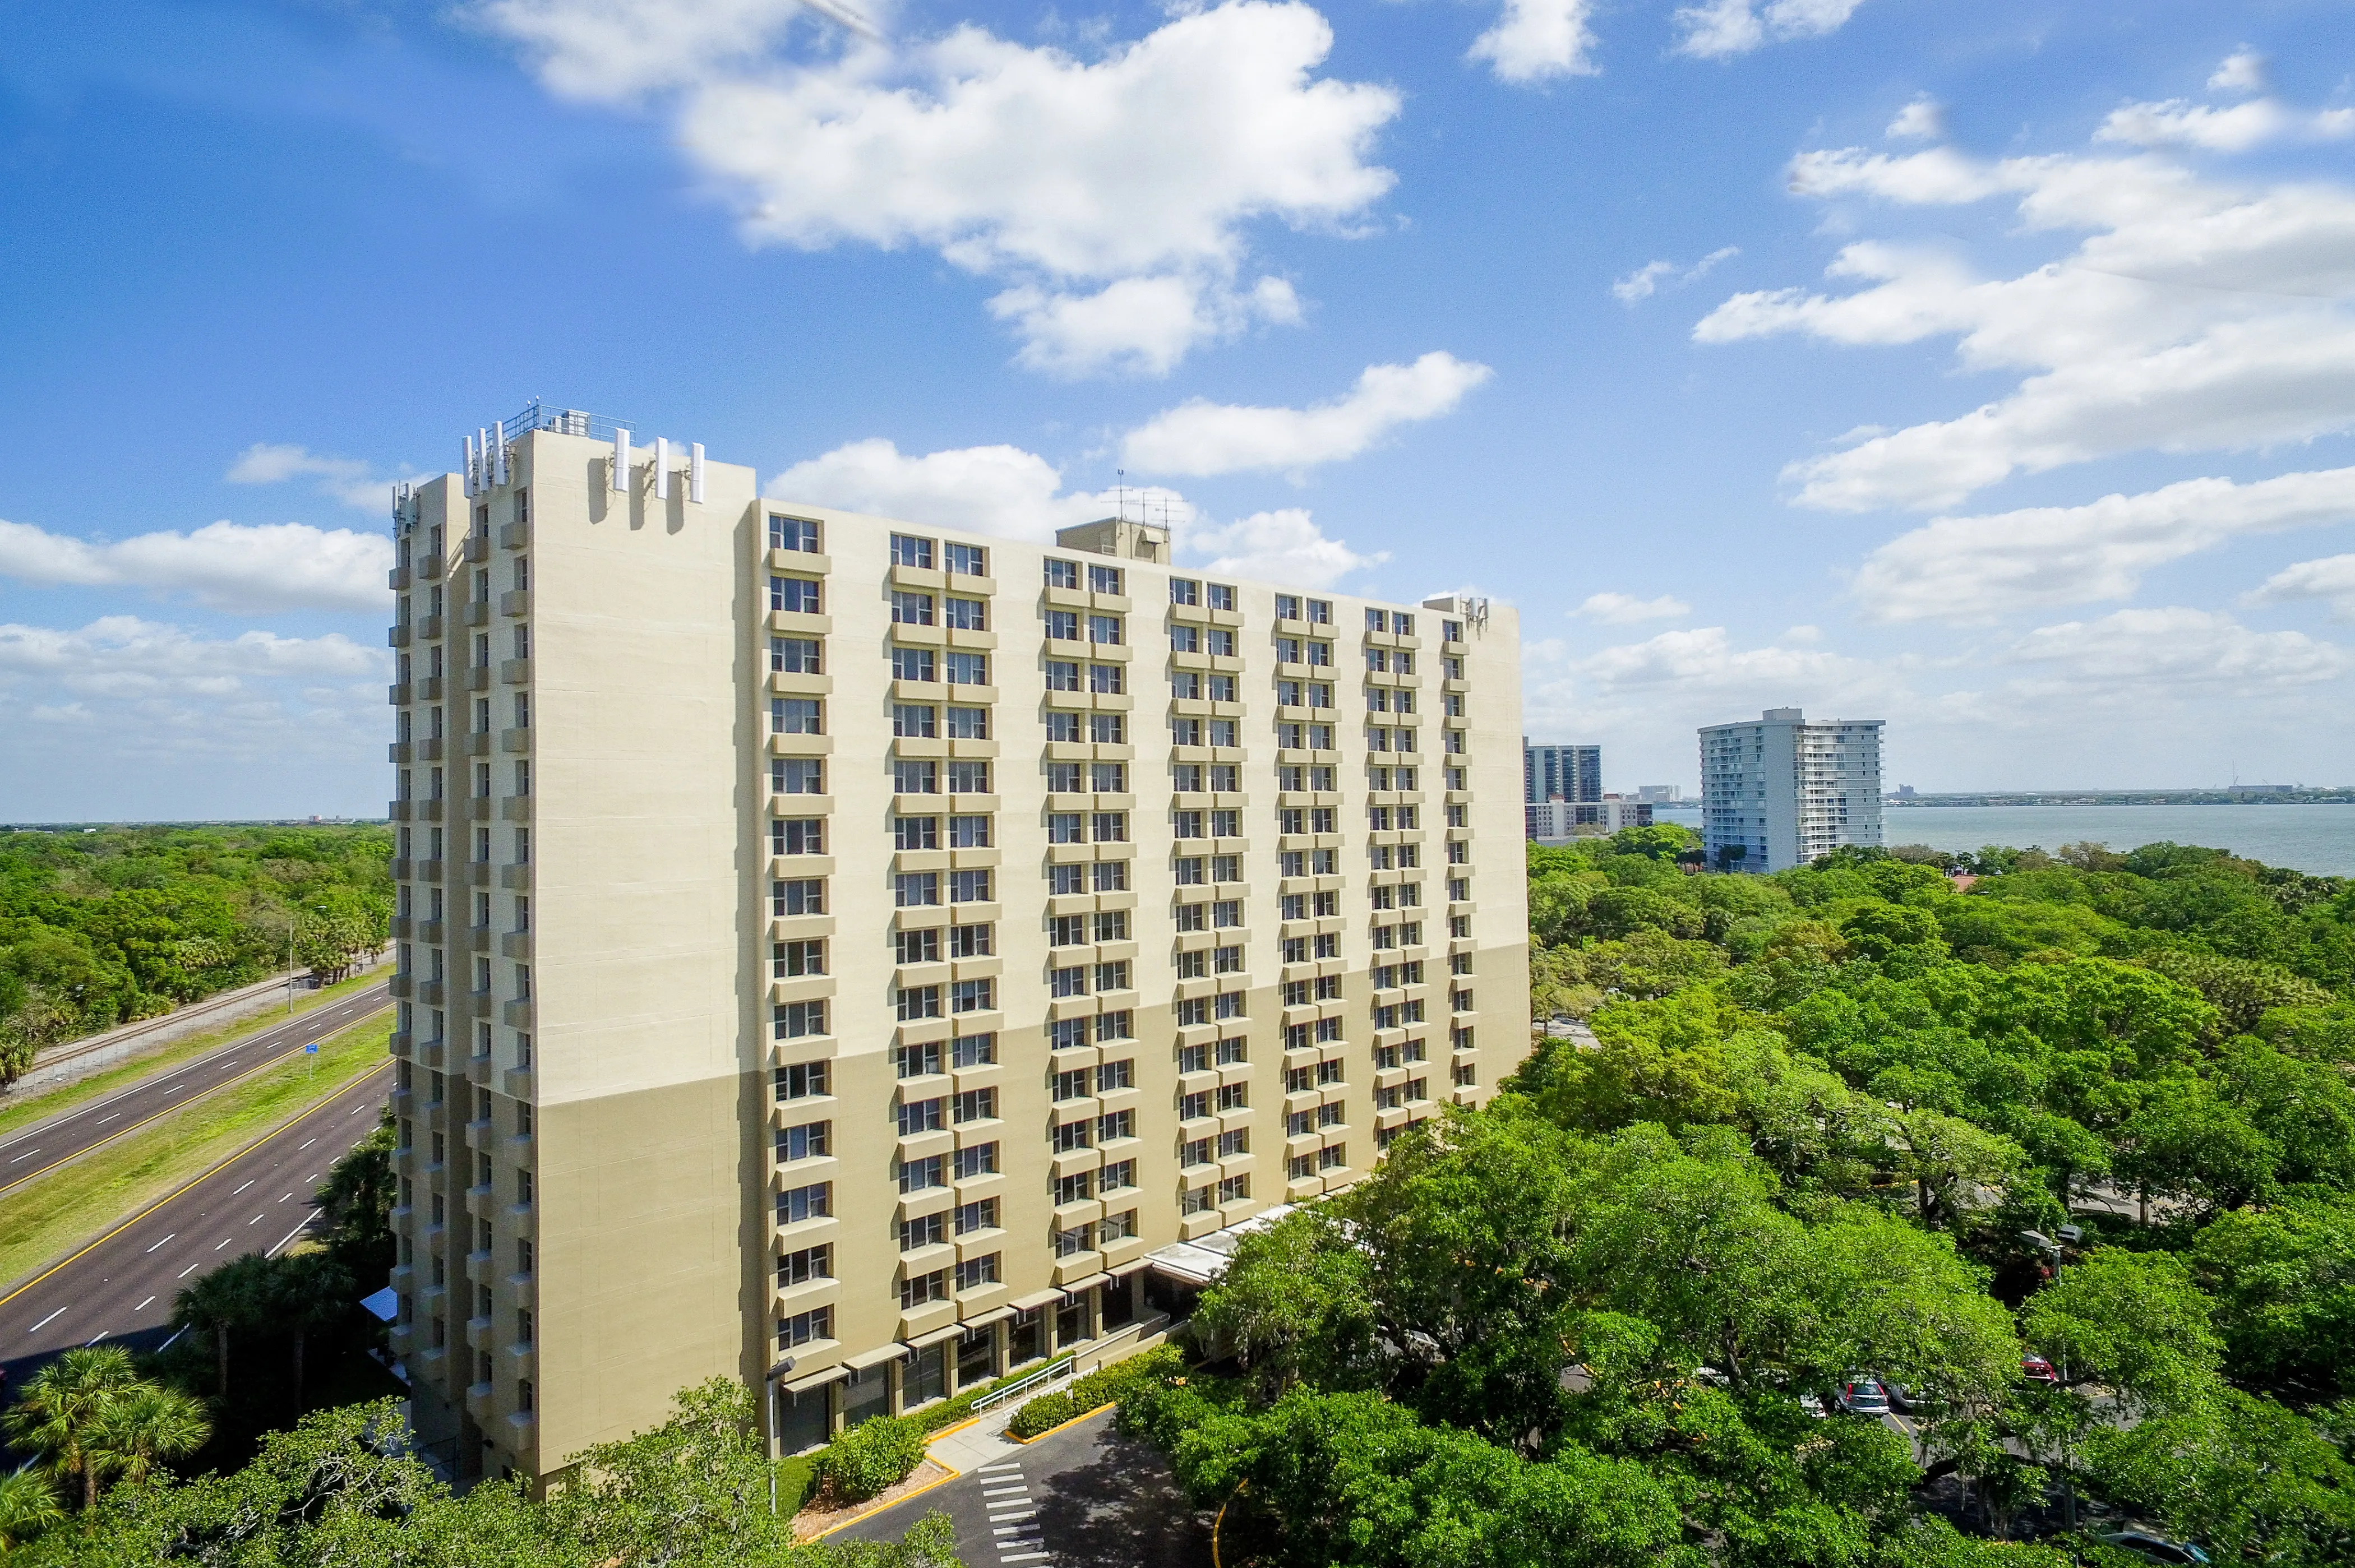 A beige high-rise apartment building surrounded by lush trees with Hillsborough Bay in the background.